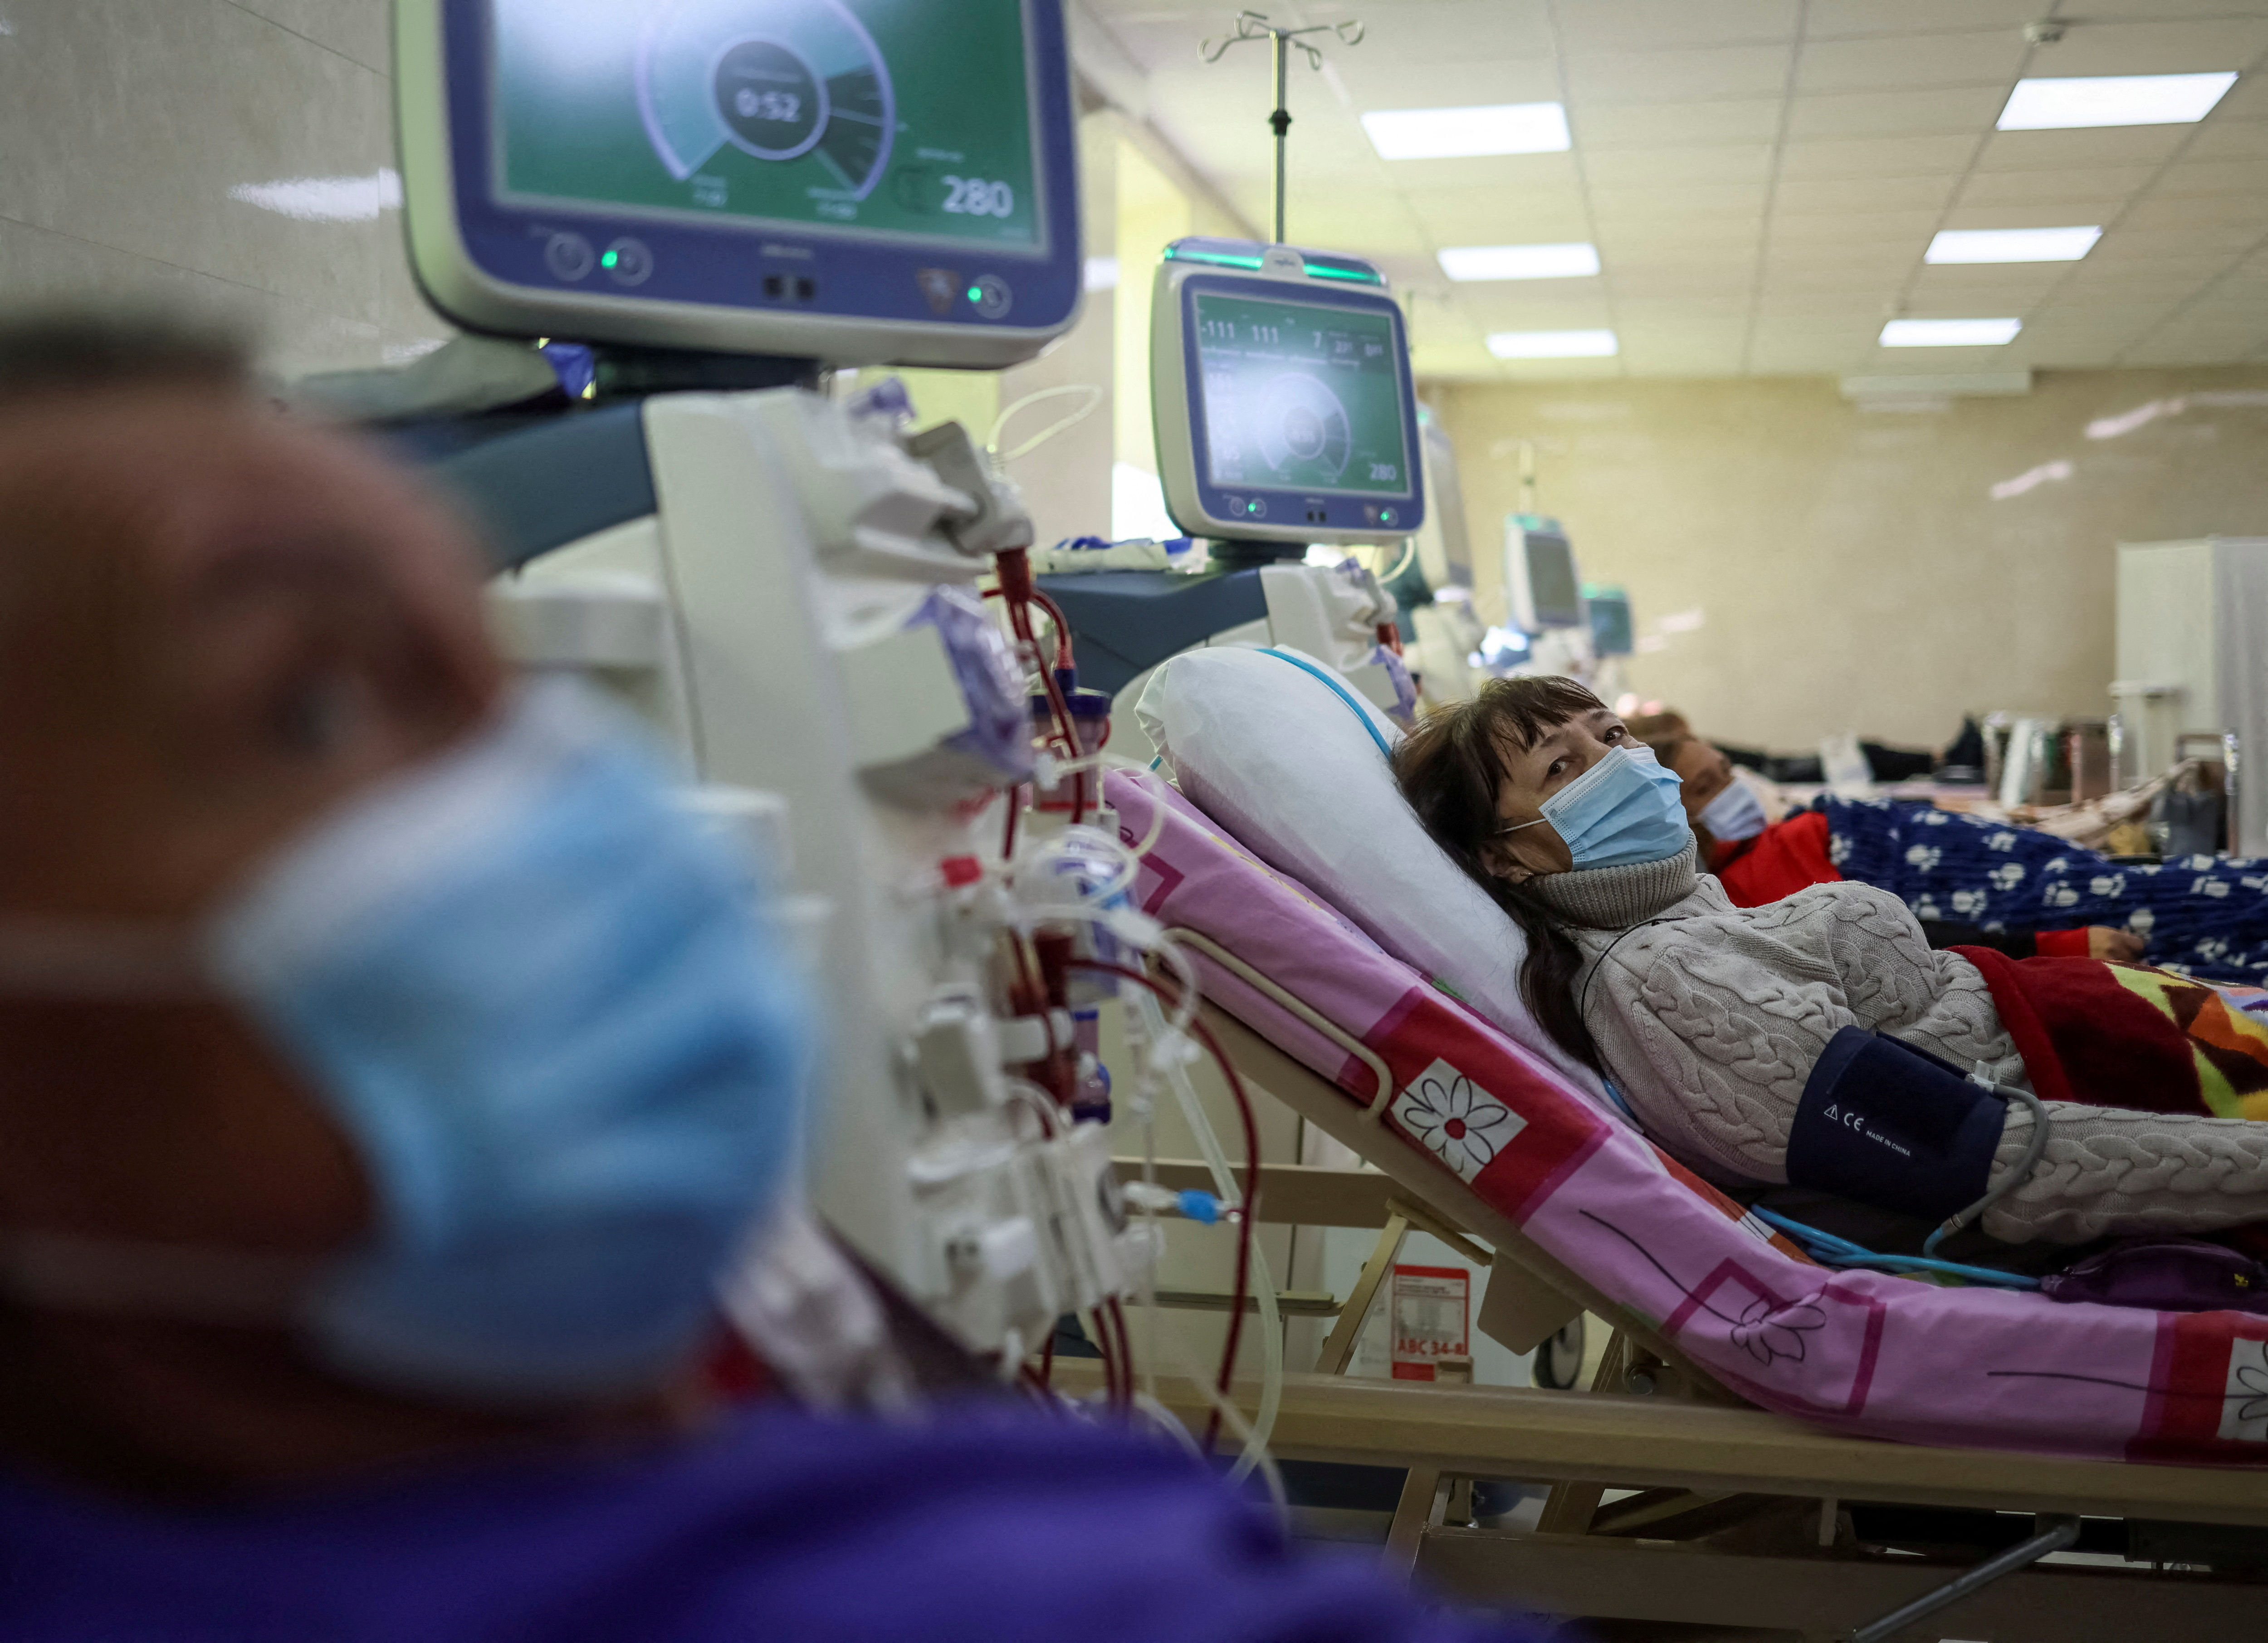 A patient receives hemodialysis treatment in a hospital in Obukhiv